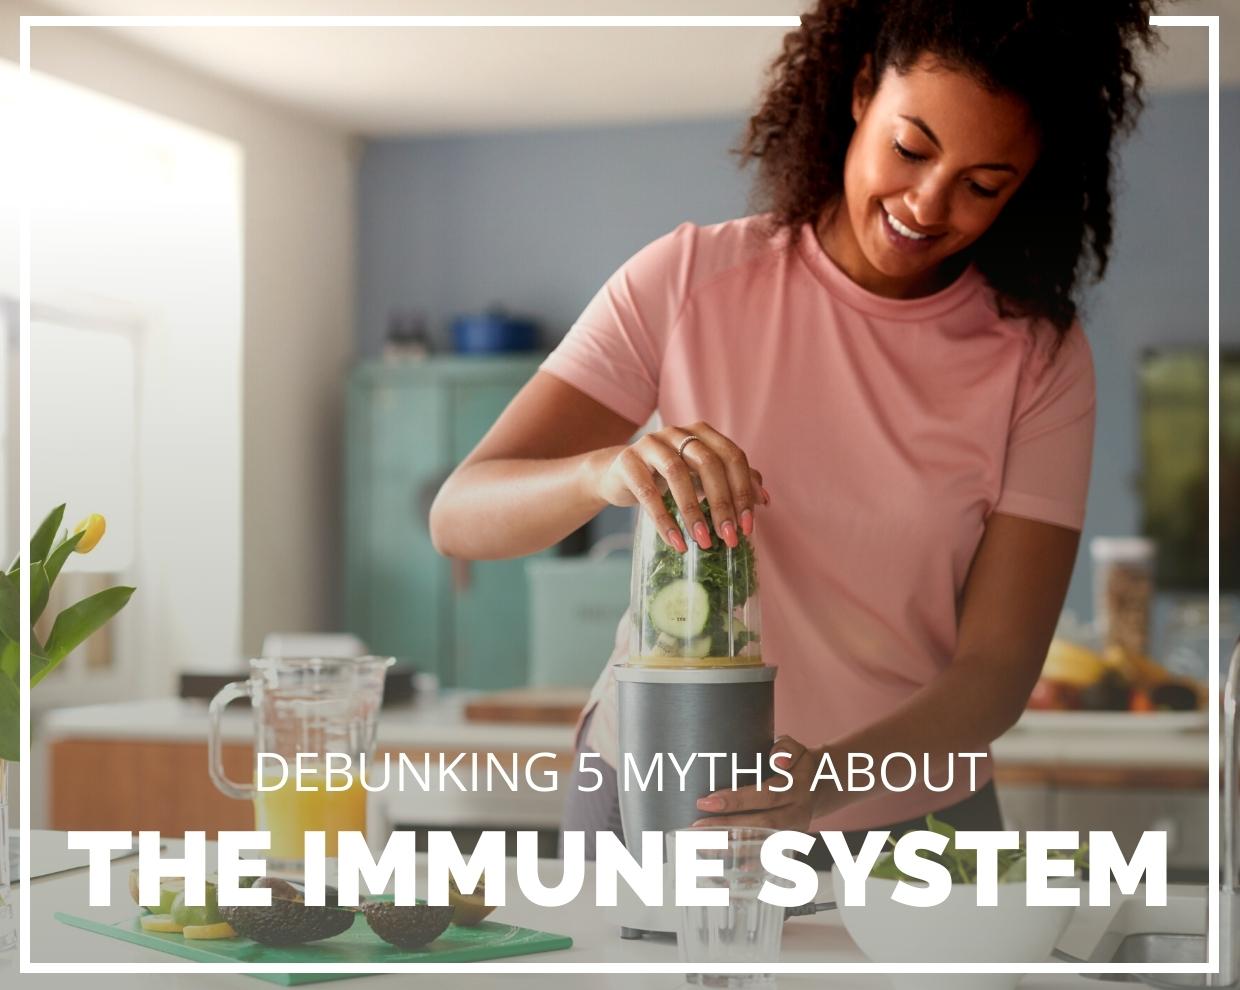 Debunking 5 myths about the Immune System blog image